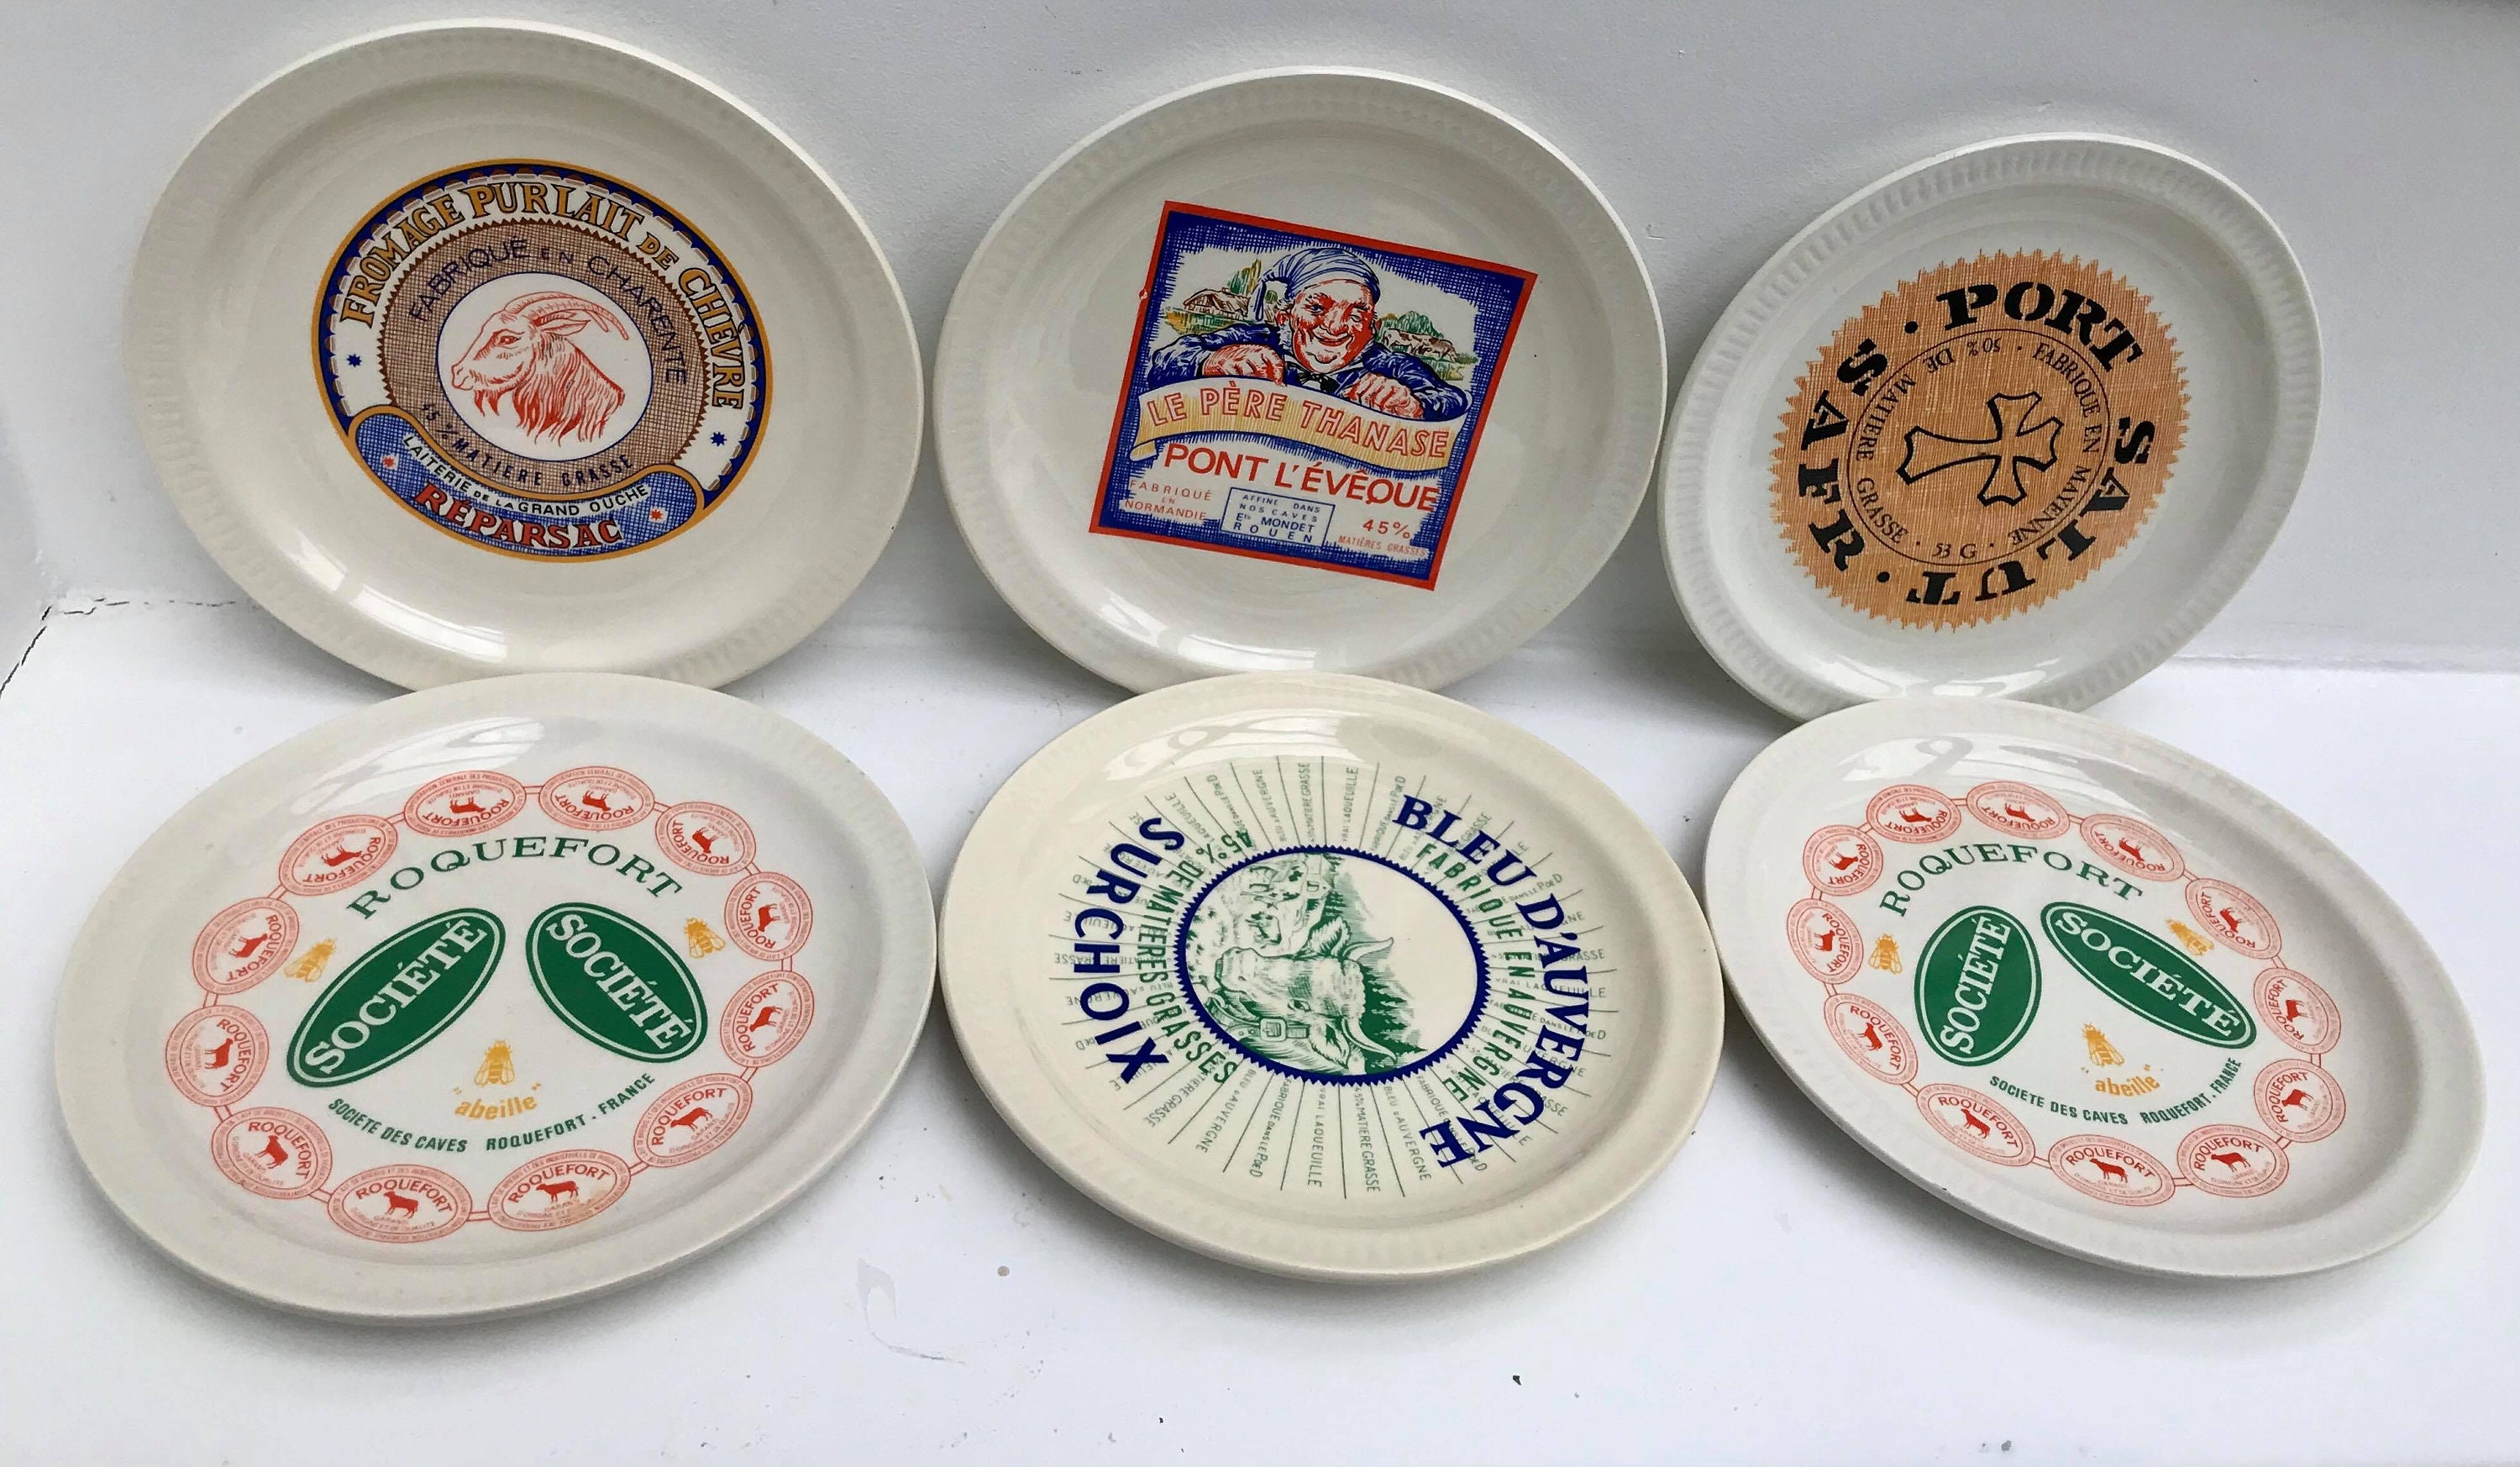 Vintage French cheese plates by Ceraminter made in Italy set of 4